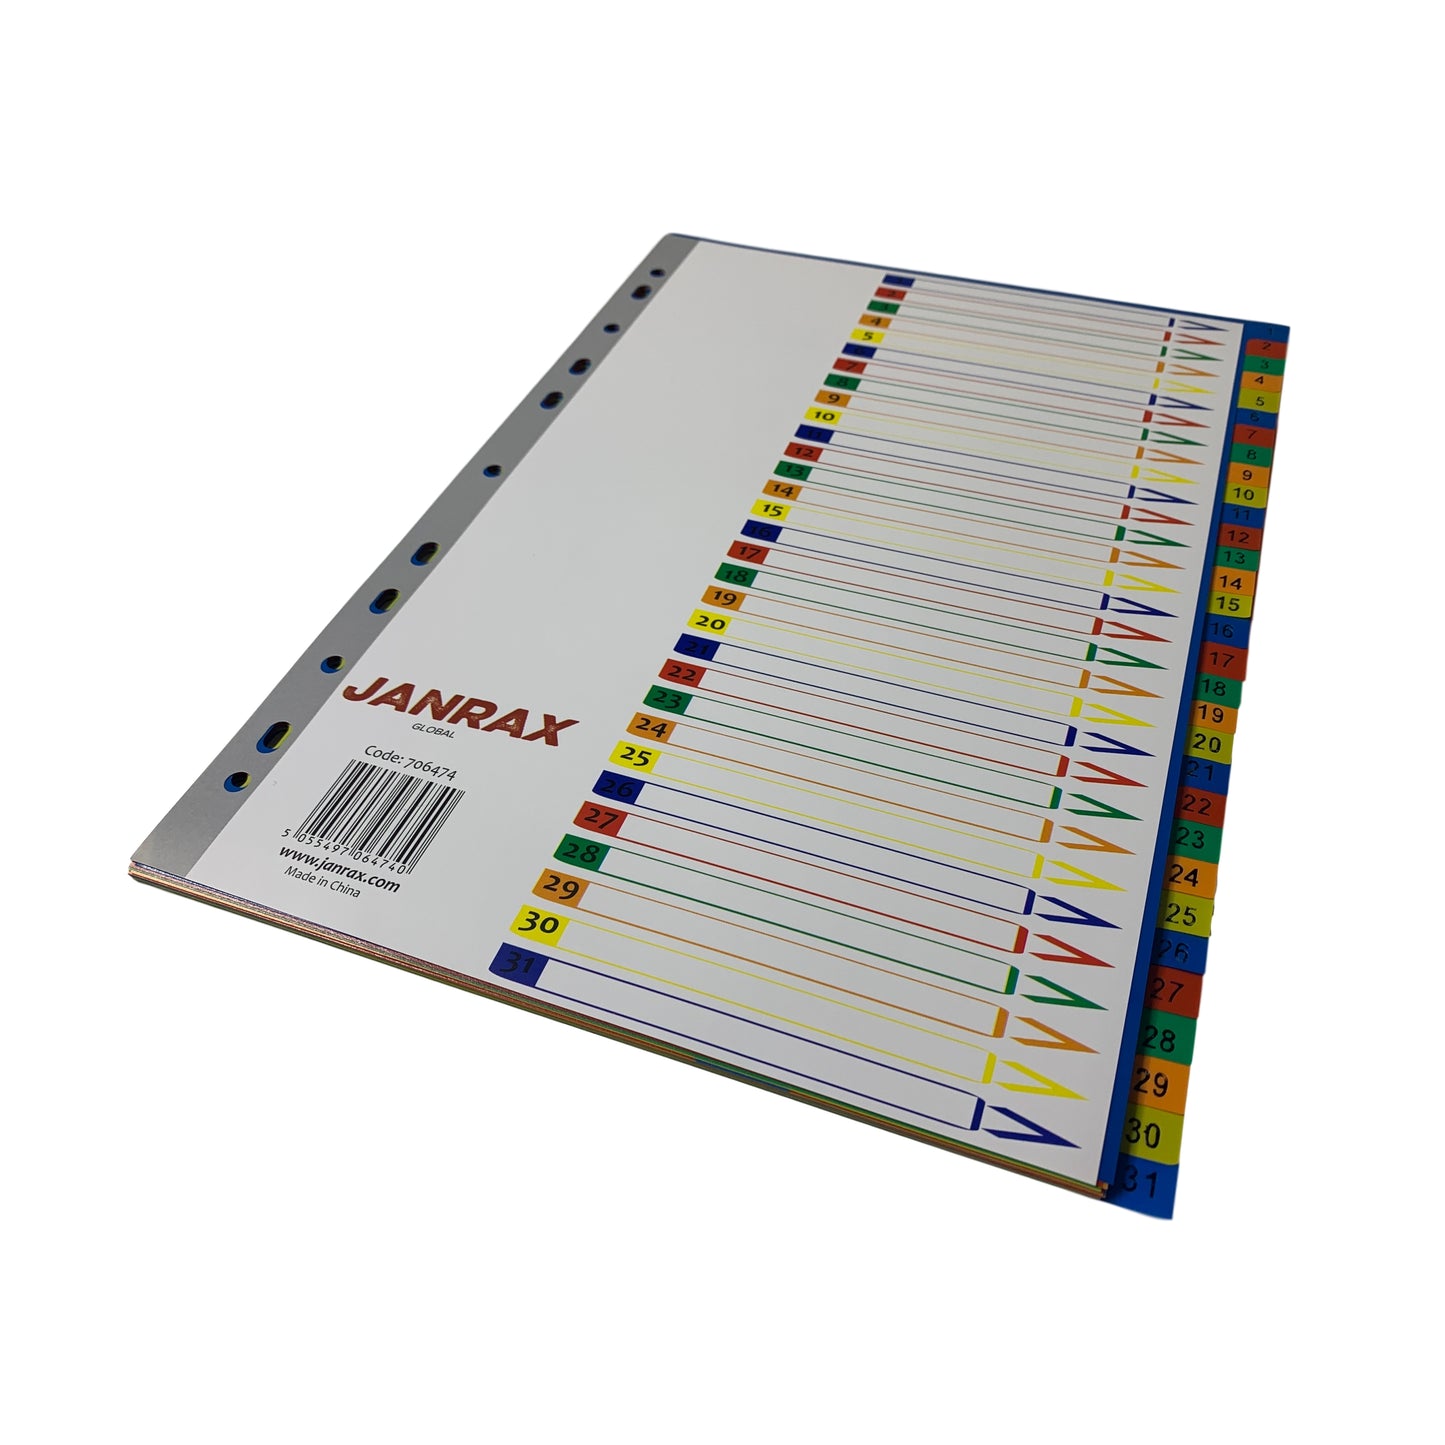 A4 31 Part Polypropylene Dividers with Reinforced Index Cover